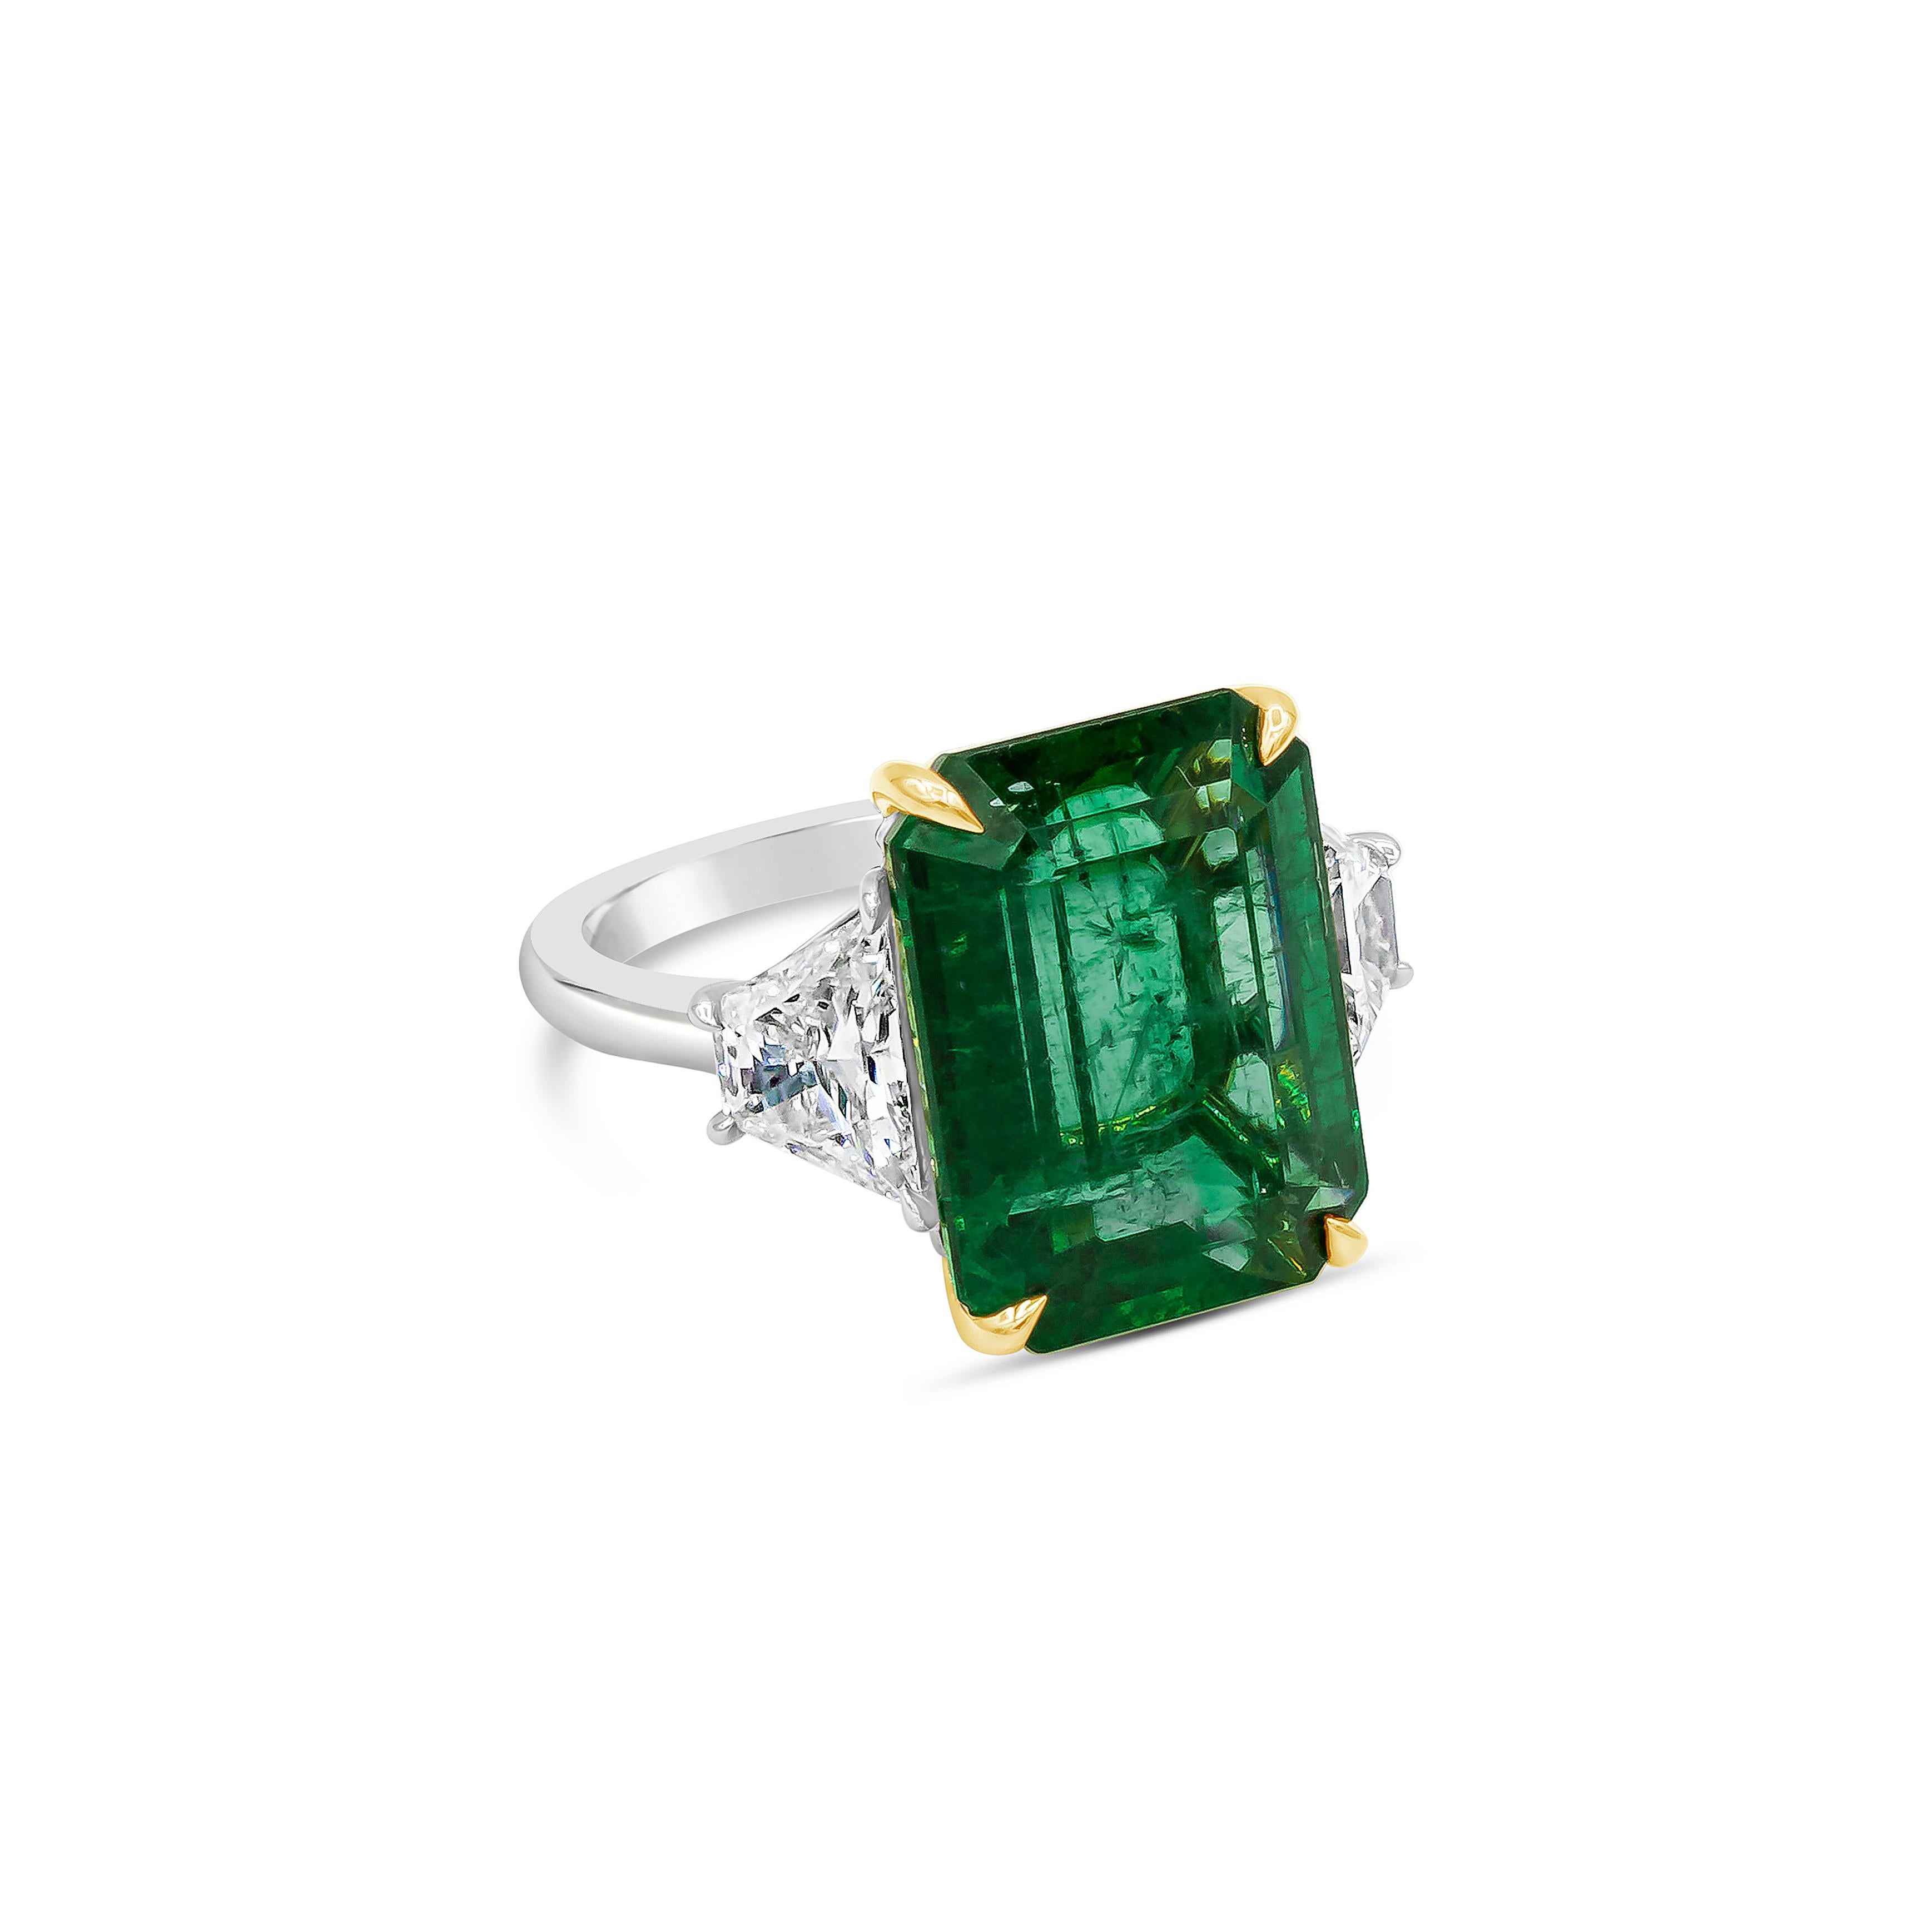 Showcases a color-rich green emerald weighing 9.36 carat, flanked by two trapezoid diamonds weighing 1.43 carats total. Set in a rounded platinum mounting. Size 6.5 US (Sizable upon request).

Style available in different price ranges. Prices are